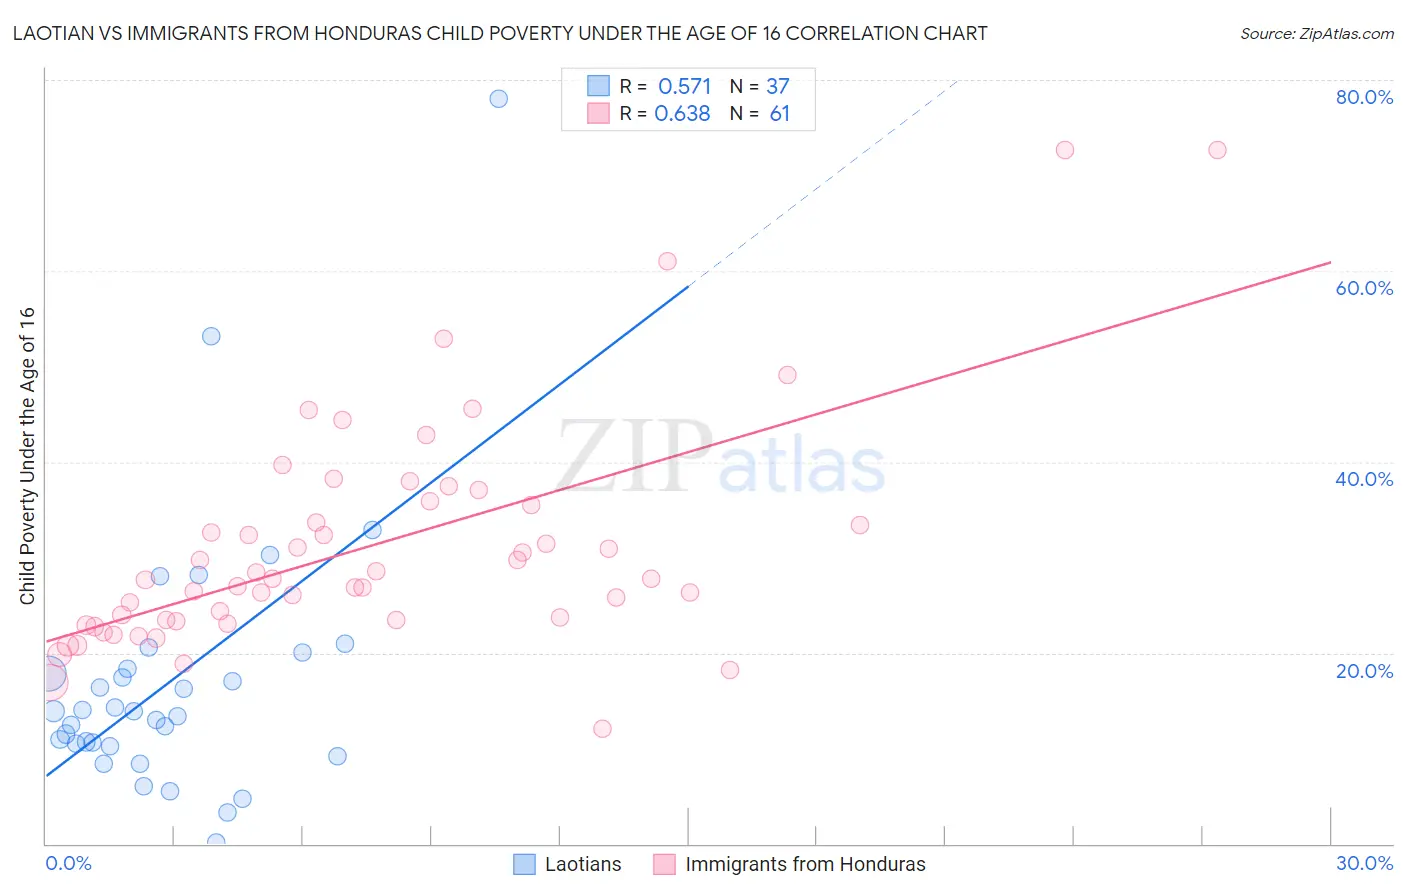 Laotian vs Immigrants from Honduras Child Poverty Under the Age of 16